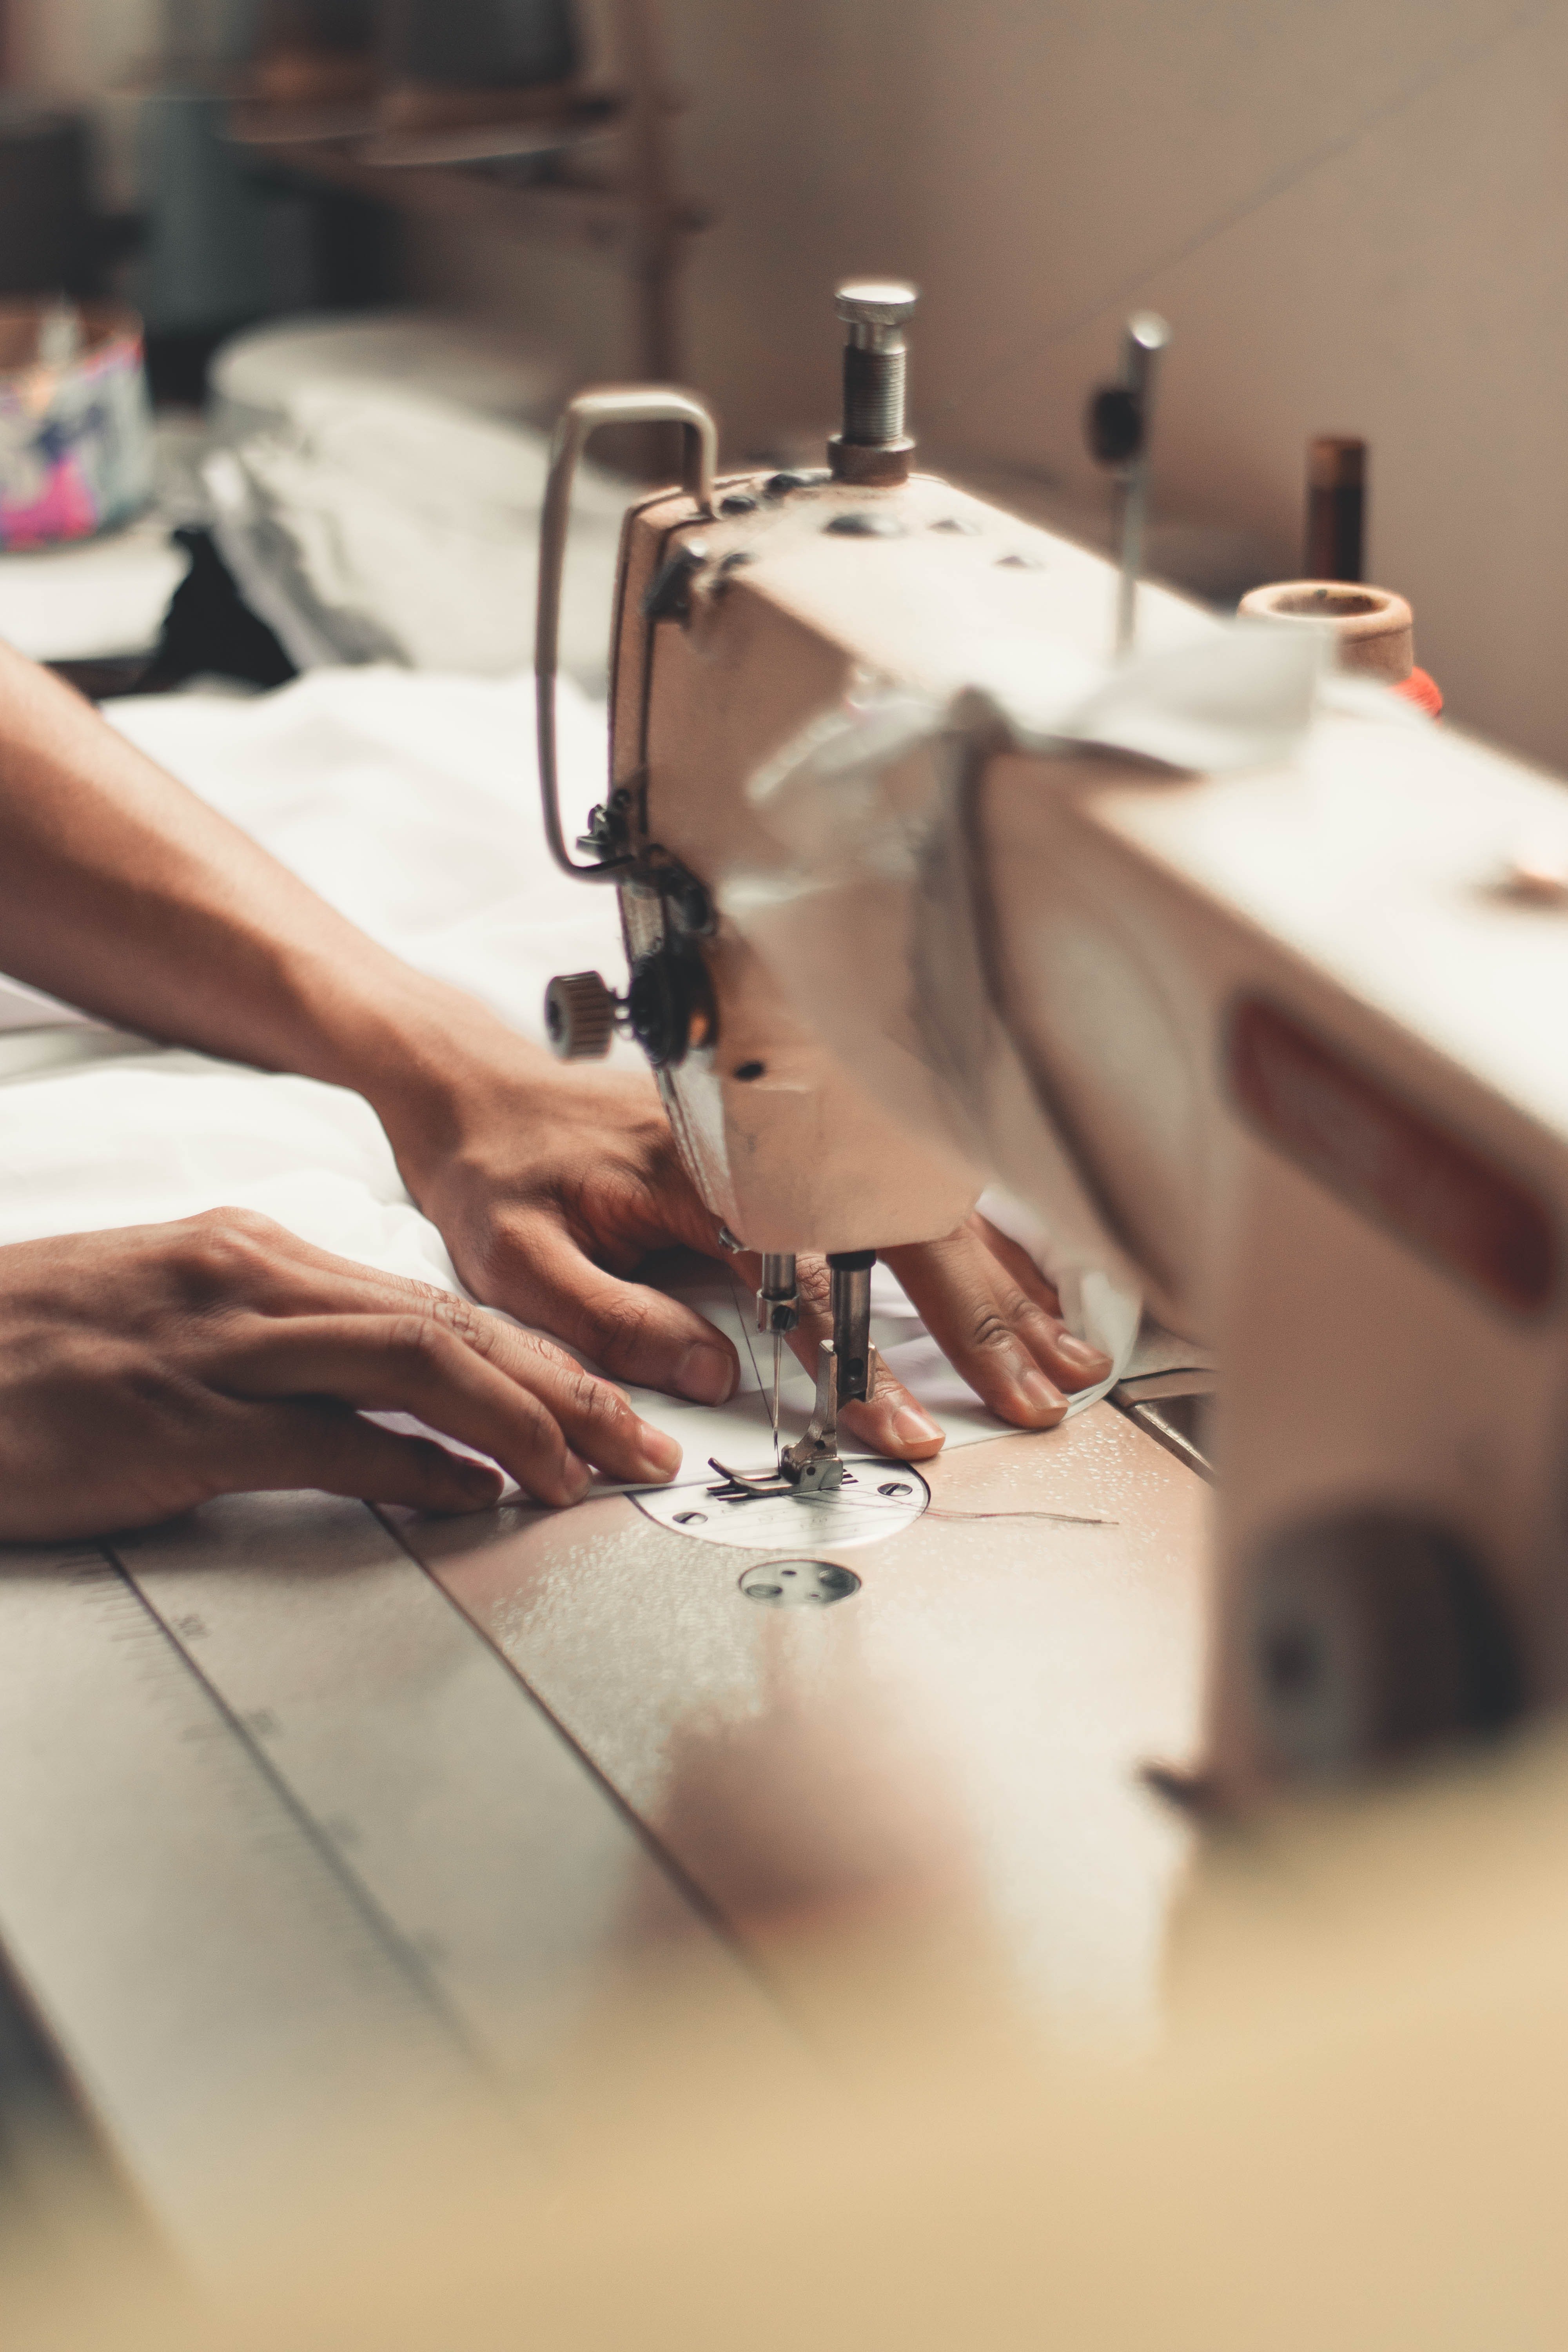 Lucy brought out her old sewing machine to make clothes for the kids. | Source: Pexels